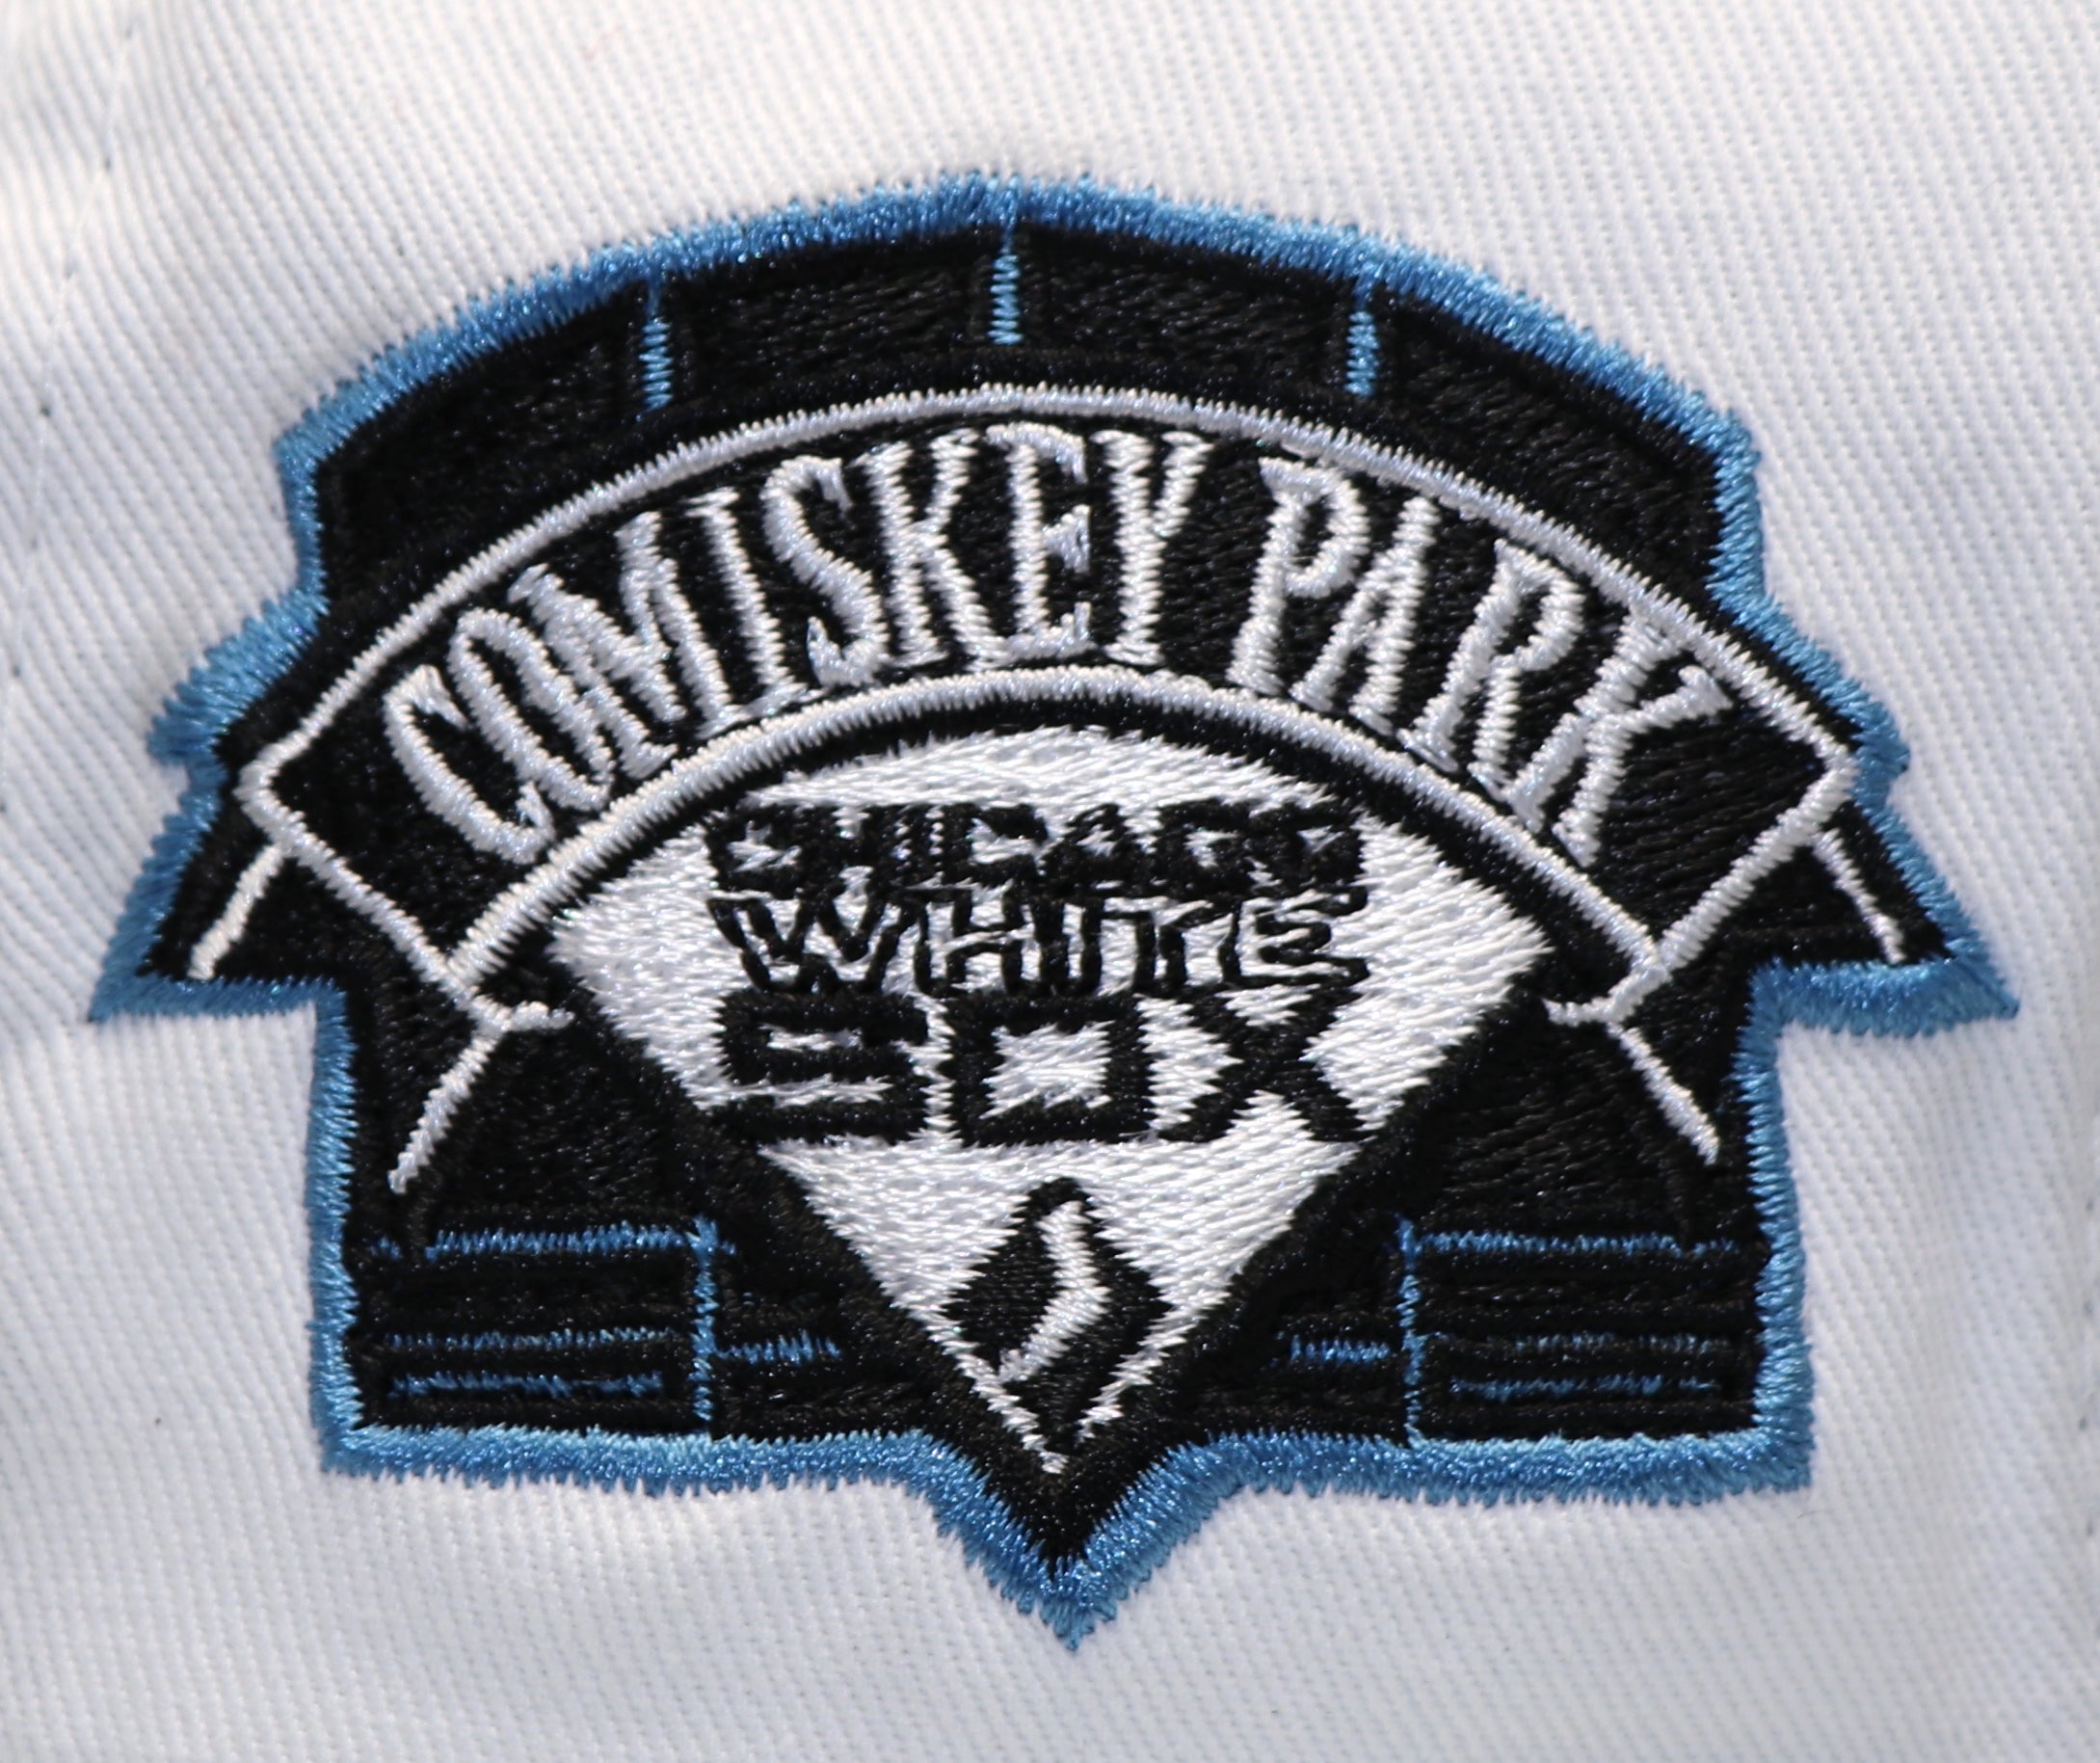 CHICAGO WHITESOX (WHITE) (PATENT LEATHER BRIM) (COMISKEY PARK) NEW ERA 59FIFTY FITTED (SKY BLUE UNDER VISOR) (S)